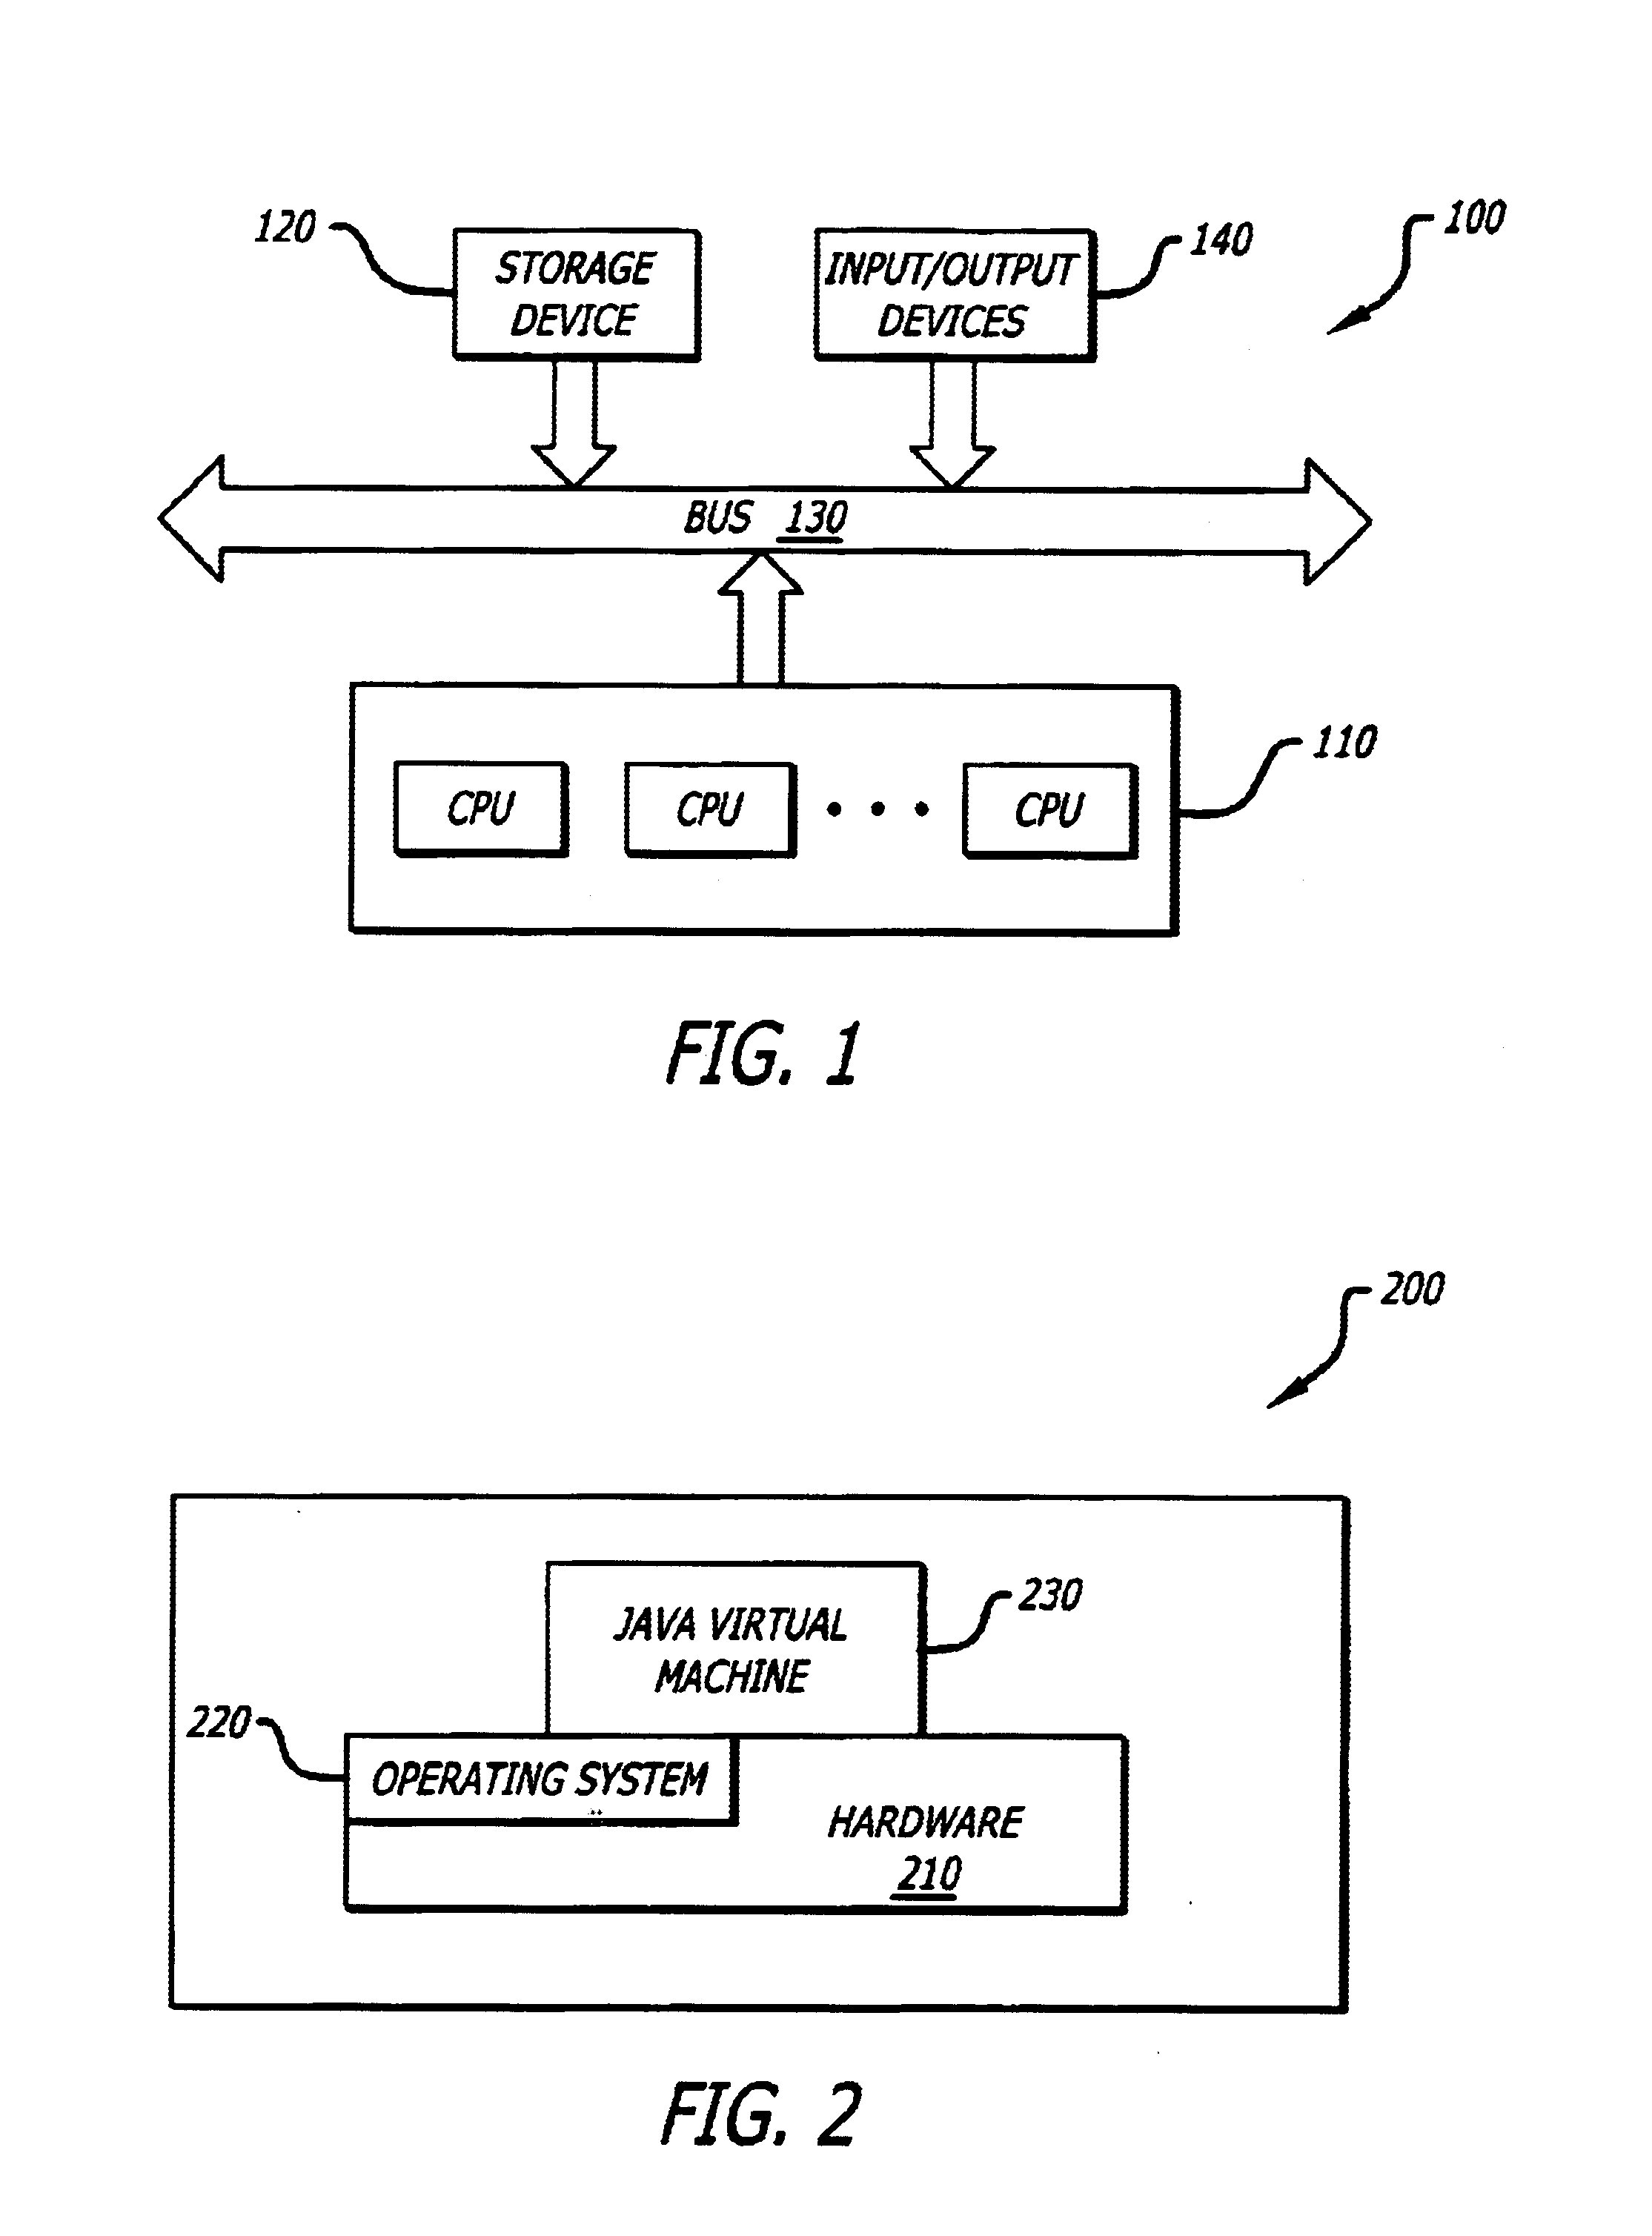 System and method for reducing power consumption in multiprocessor system